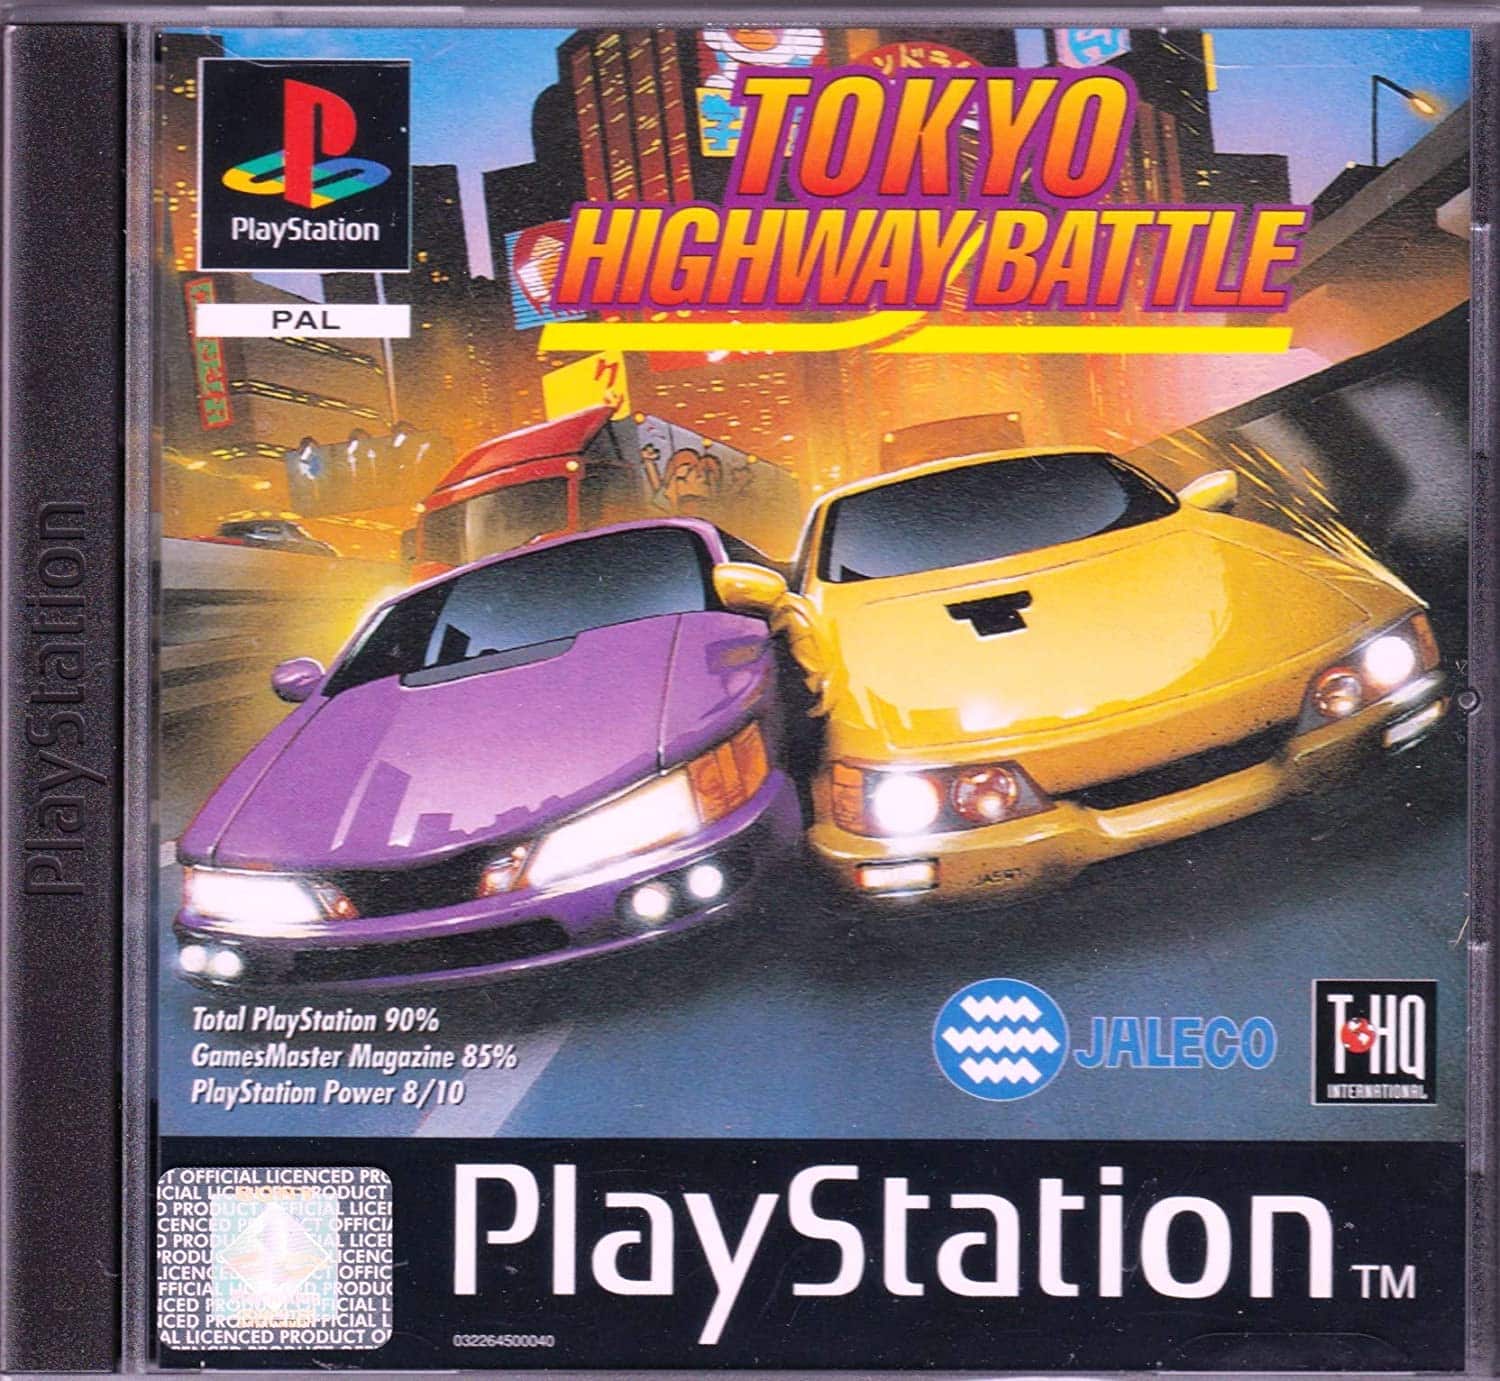 Tokyo Highway Battle player count stats